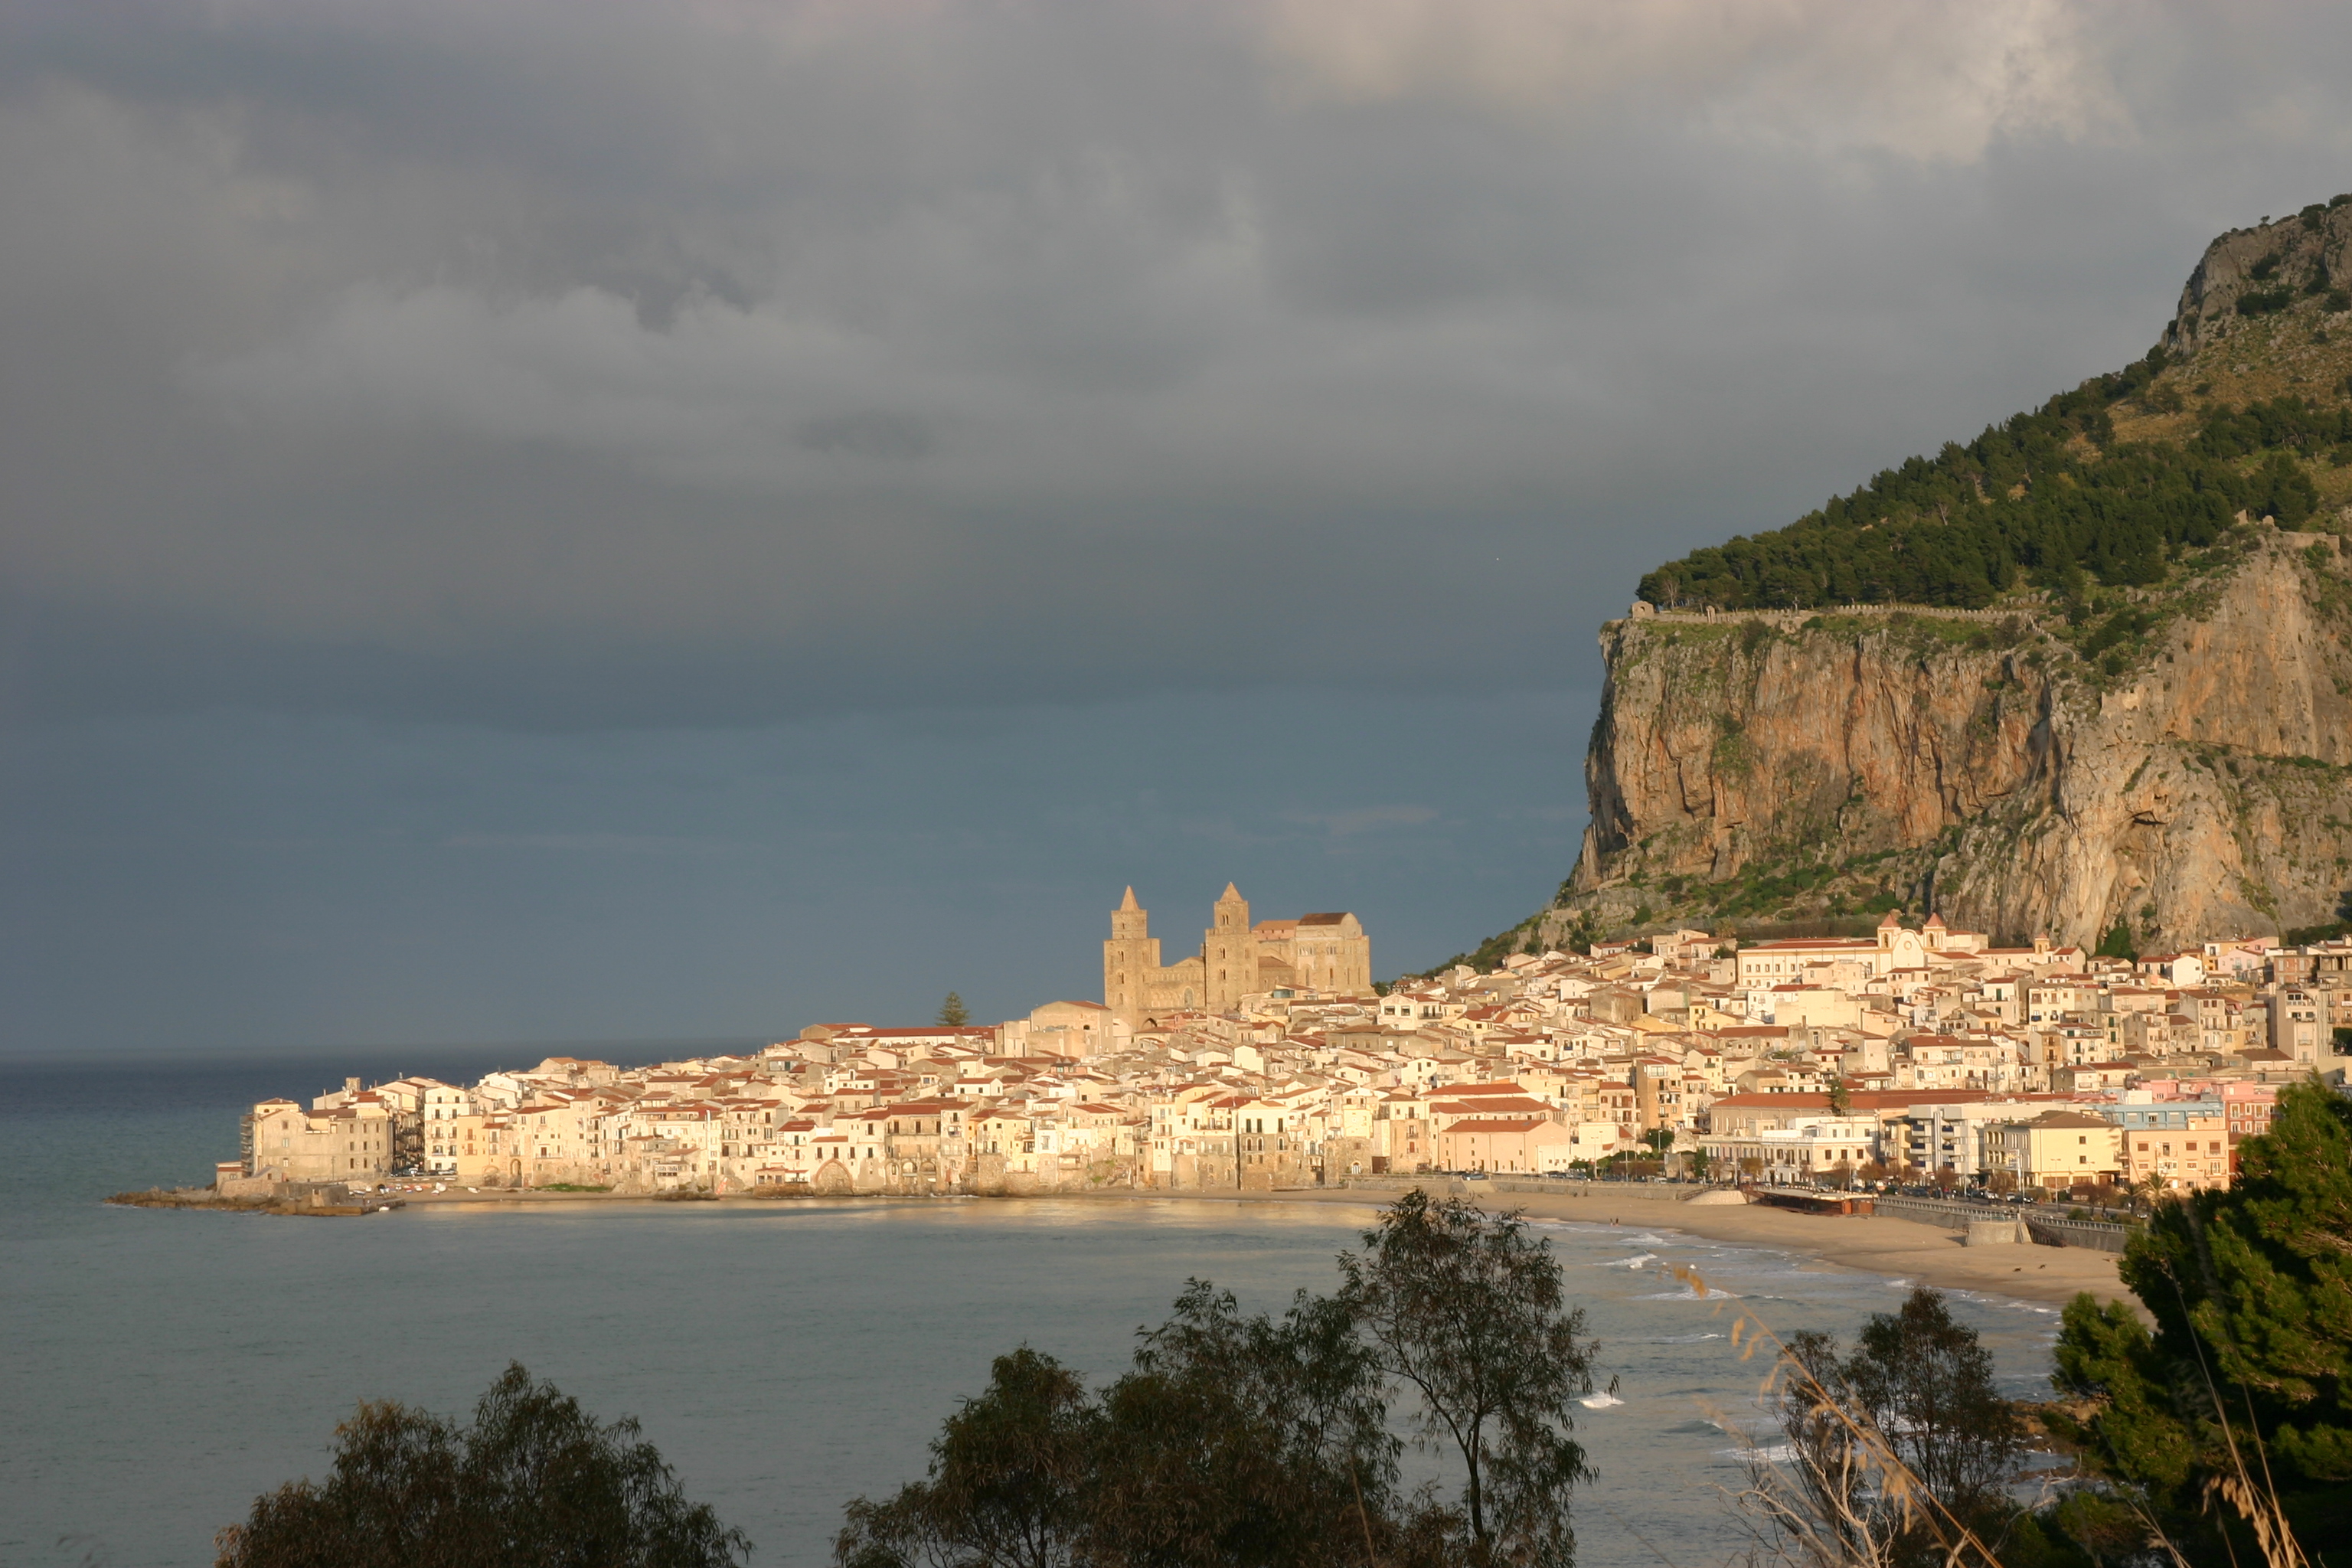 View of Cefalù - Cefalù - Italy 2015 (2)